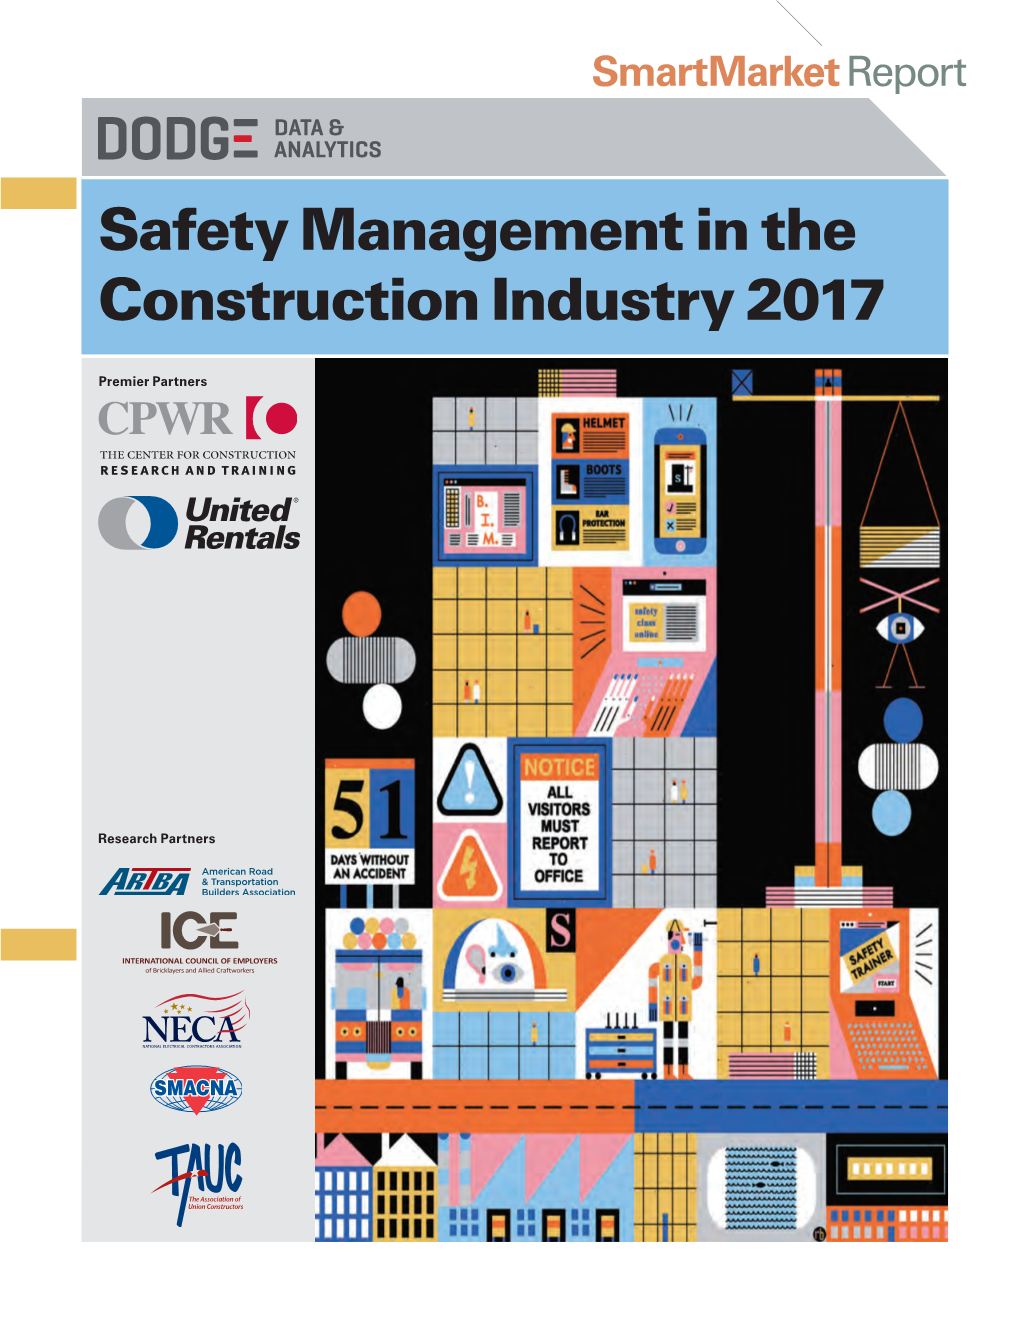 Safety Management in the Construction Industry 2017